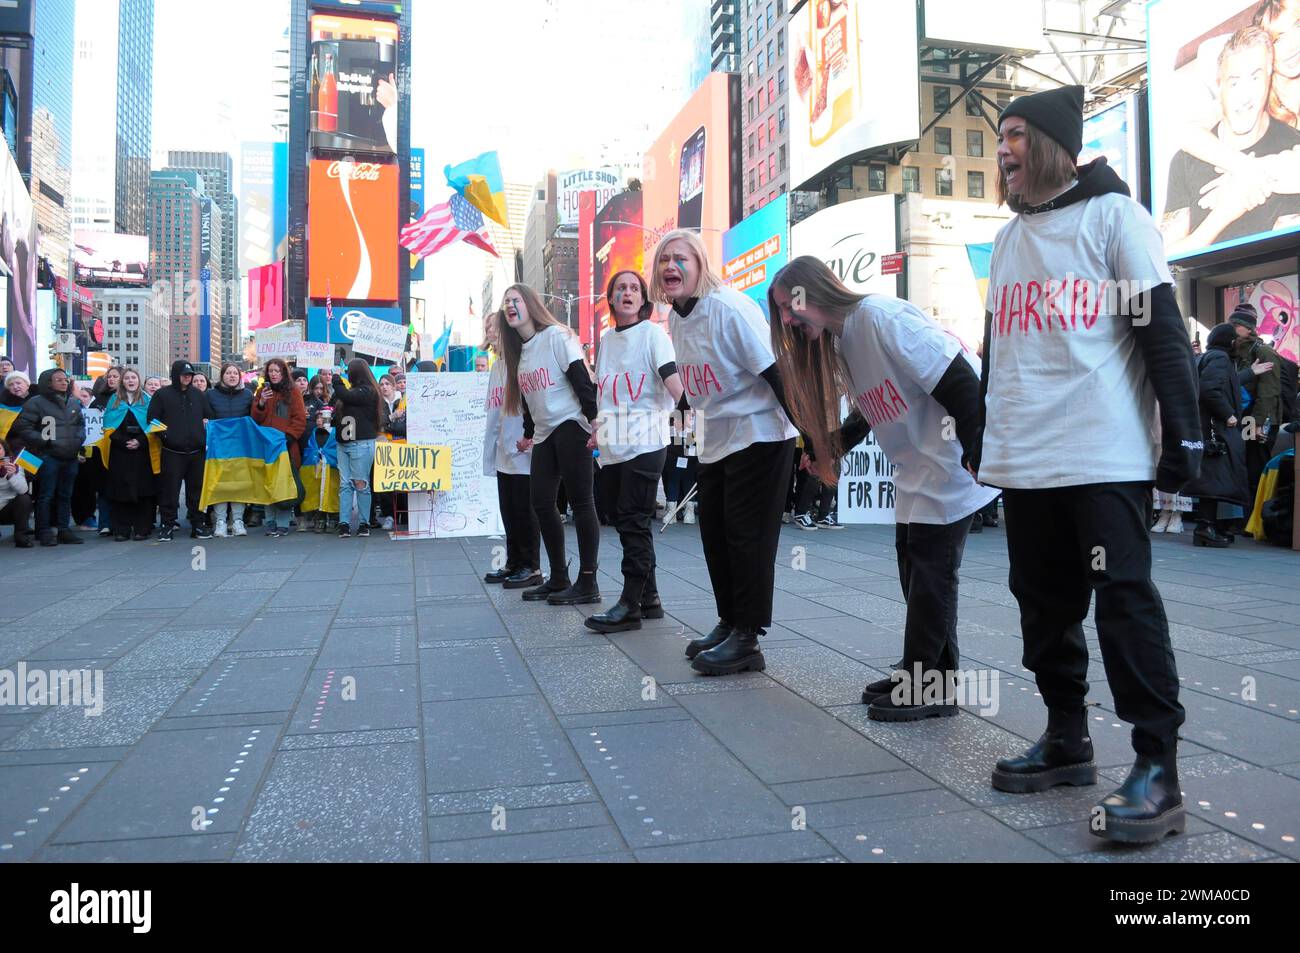 Pro-Ukraine demonstrators, each wearing a t-shirt with a name of a Ukrainian city written on it, rally in Times Square. Demonstrators rallied in Manhattan, New York City on the two-year anniversary of the Russian invasion of Ukraine. Protestors condemned the invasion and opposed Russian President, Vladimir Putin. Last weekend, Russian forces captured the eastern Ukrainian city of Avdiivka located on the front line. The loss of the city comes as a $60 billion aid package for Ukraine from the United States has been stalled following disagreements in Congress. Ukrainian President, Volodymyr Zelen Stock Photo